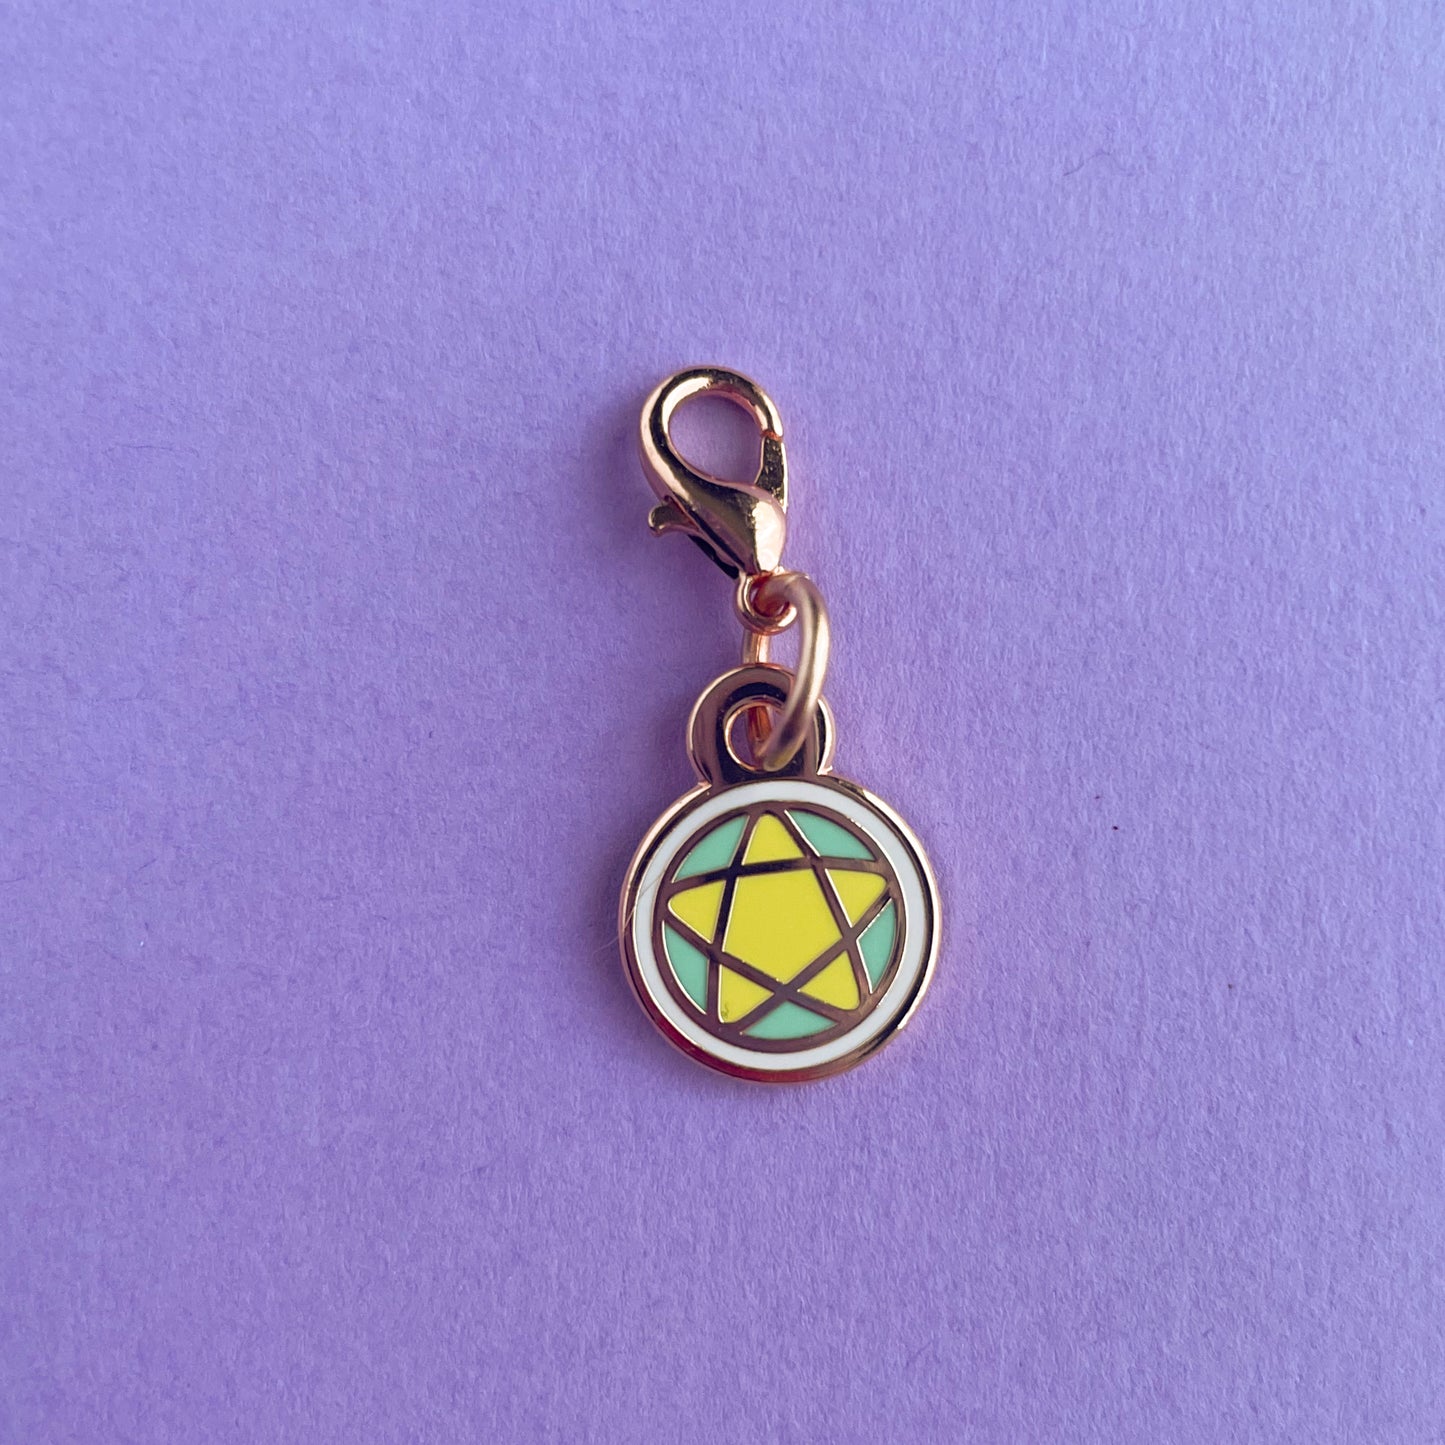 A lobster claw clasp charm of a pentacle in pastel colors and rose gold colored metal. The charm is on a lavender background.